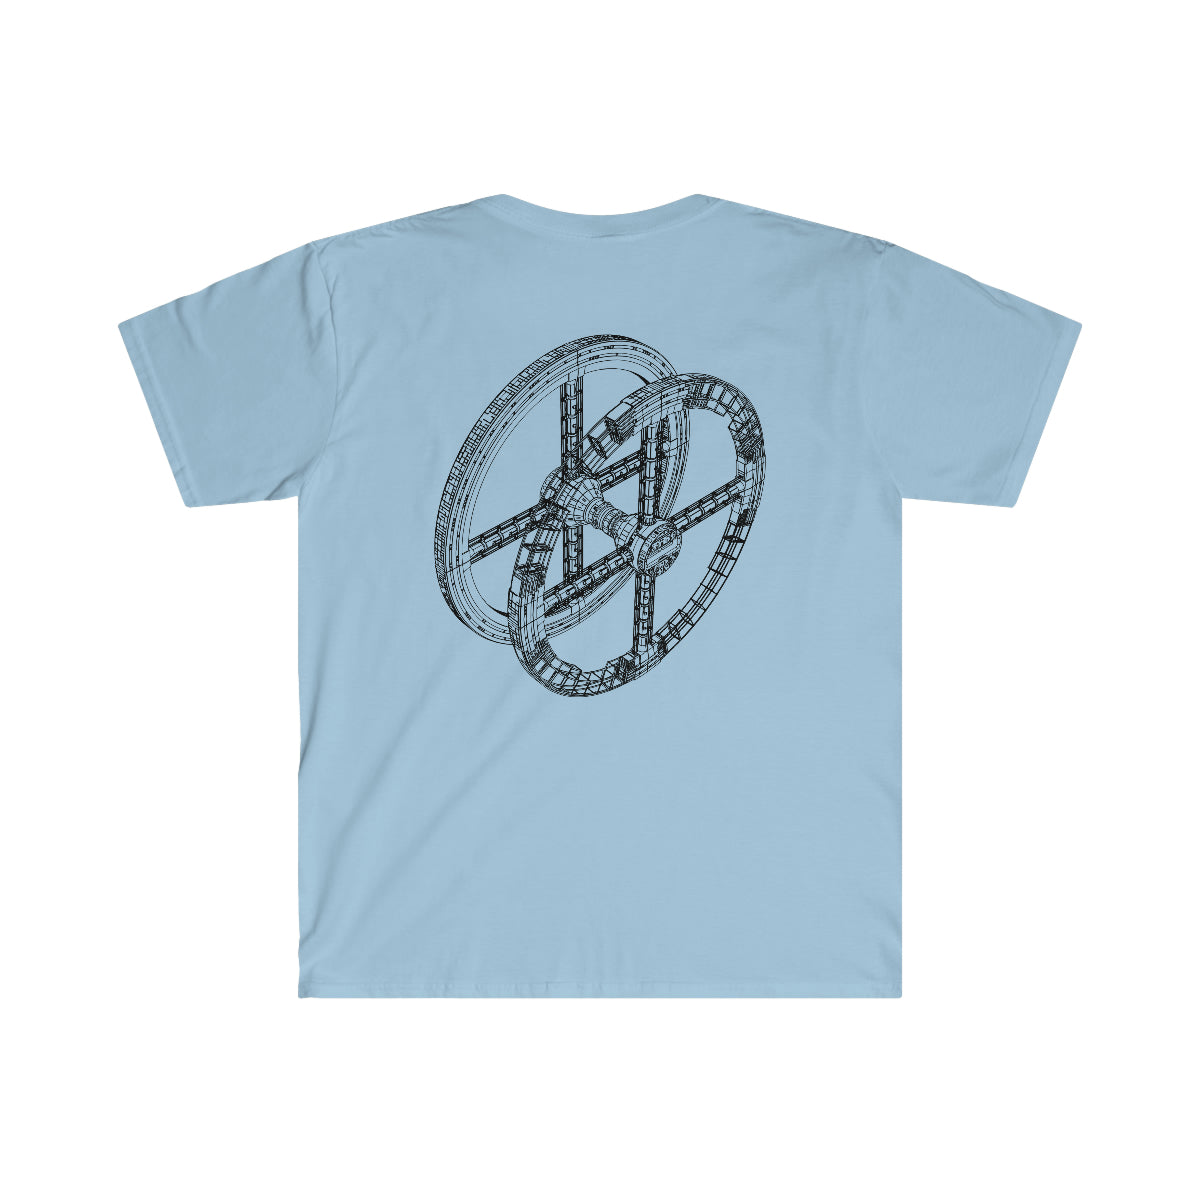 A light blue Deep Space Station t - shirt with an image of a wheel. (Brand: One Tee Project)